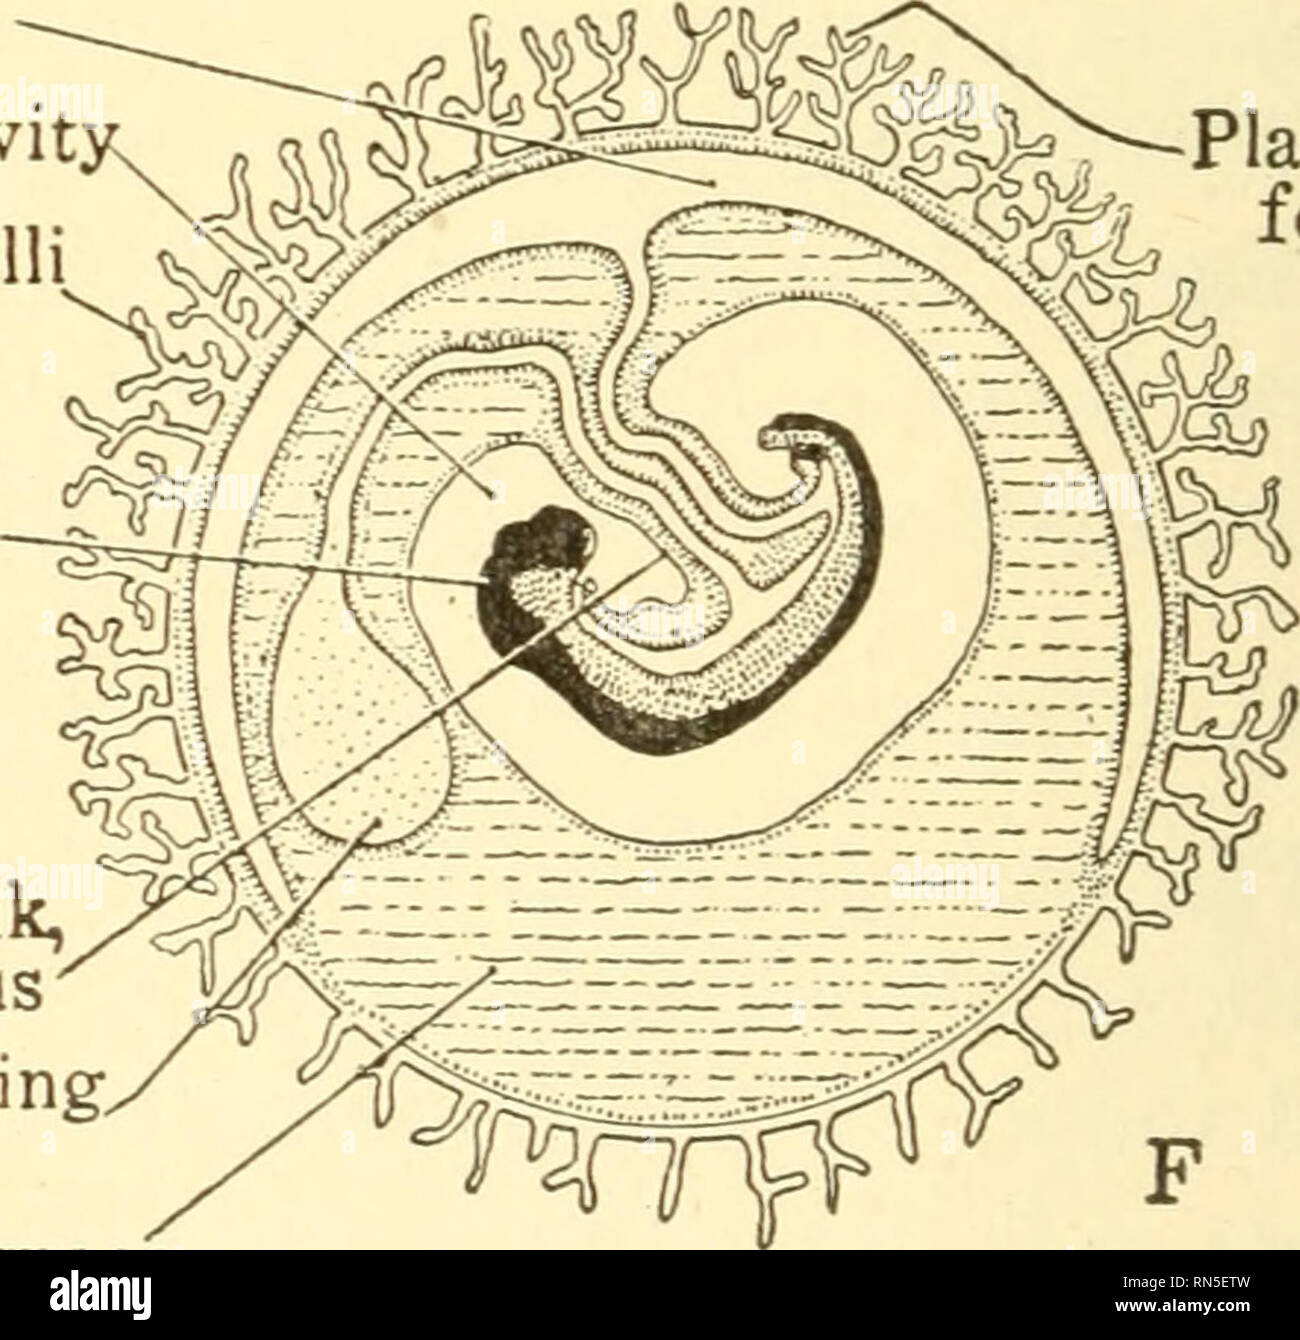 . Animal biology. Biology; Zoology; Physiology. Allantois Amniotic cavit orionic villi Head of embryo. Placenta fetal ,Body stalk, vS^S^ umbilicus Degenerating yolk sac Extra-embryonic space Fig. 176. — Diagrammatic sections showing the development of the egg and embryonic membranes of a Mammal. A, blastula showing fundament of embryo at top, before the appearance of the amnion. B, embryo outlined, with developing amnion and yolk sac. C, embryo with amnion further developed and allantois appearing. D, embryo with amnion closing, and allantois joining with outer membrane, or chorion. E, F, embr Stock Photo